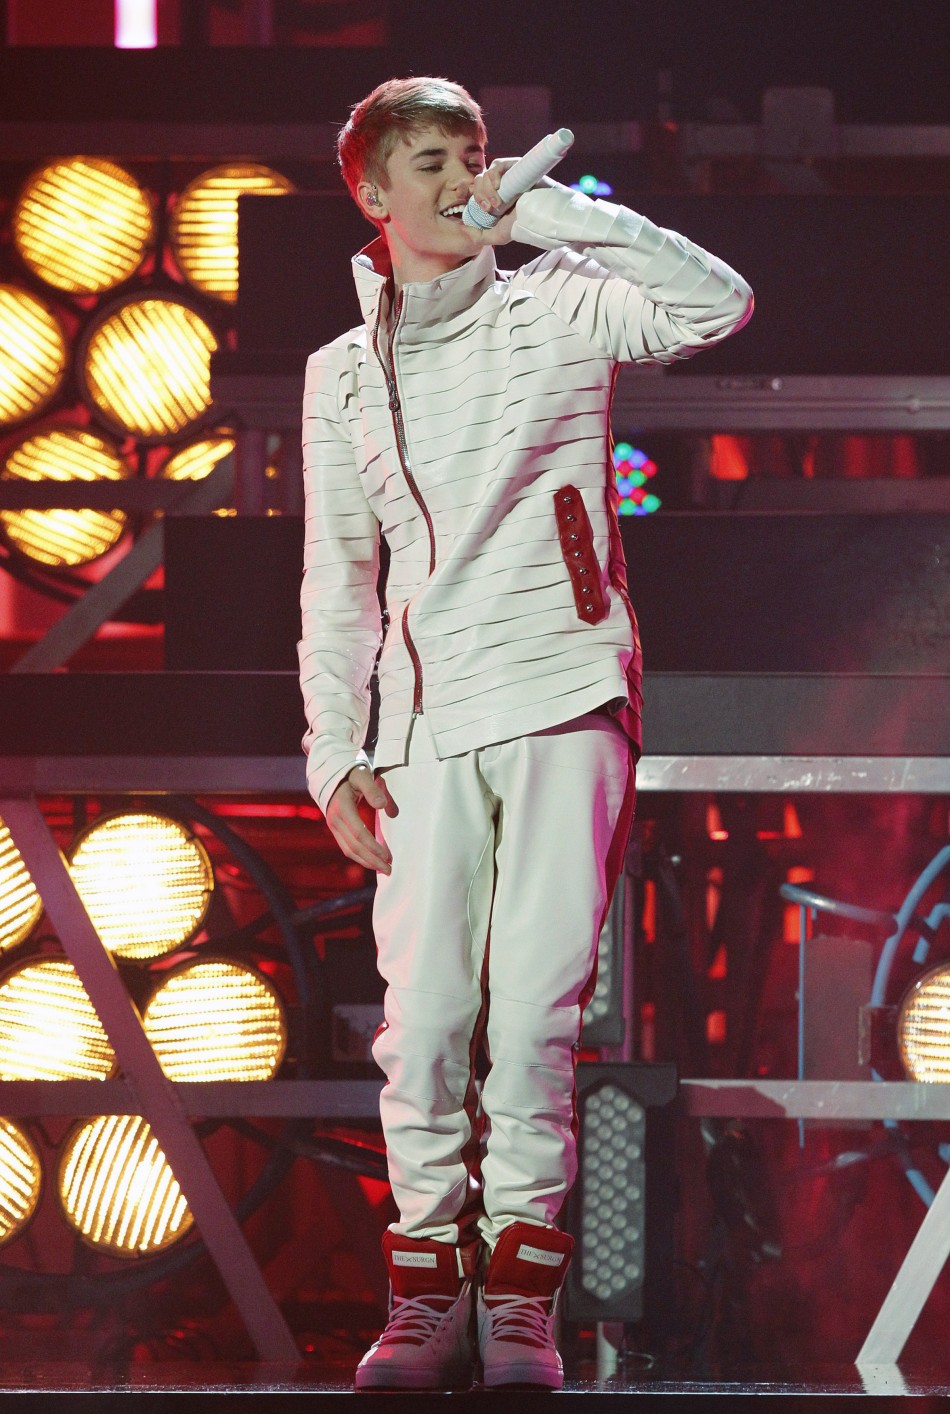 Singer Justin Bieber performs at the 2011 American Music Awards in Los Angeles